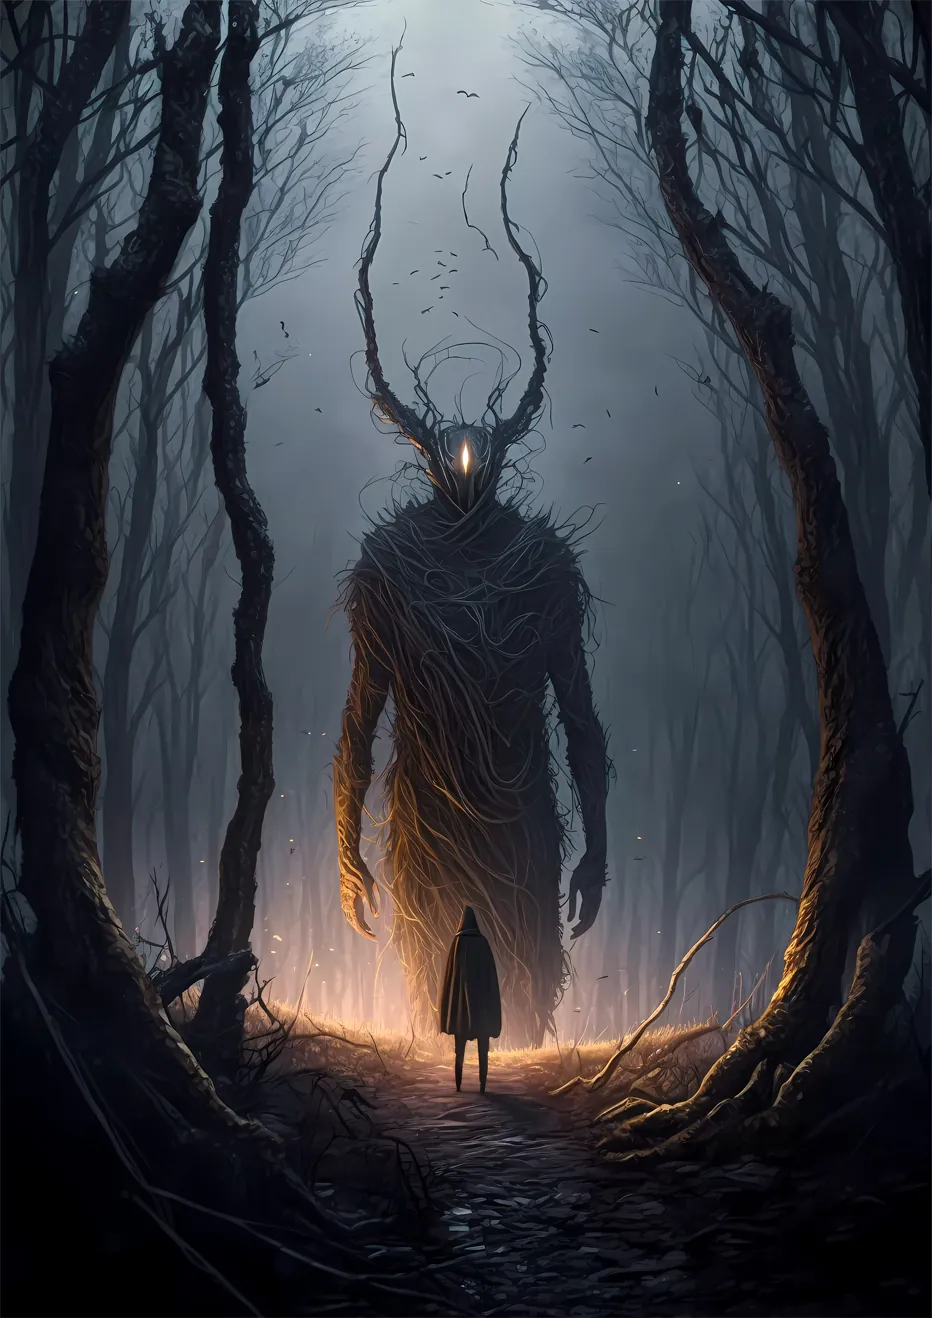 The Unknown: Solitary figure facing colossal creature in a fog-laden forest. Dark and surreal art.